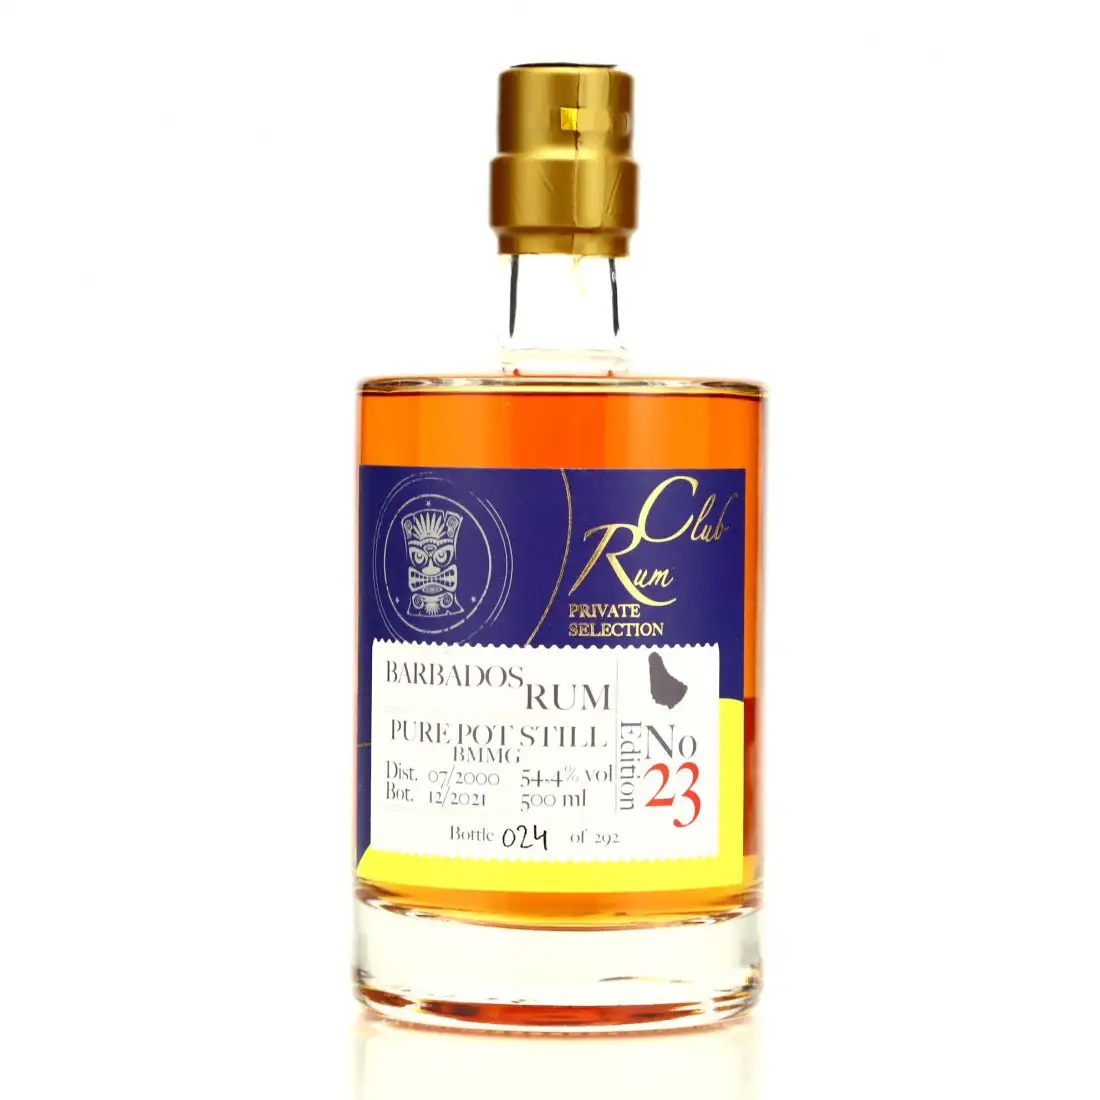 Image of the front of the bottle of the rum Rumclub Private Selection Ed. 23 BMMG